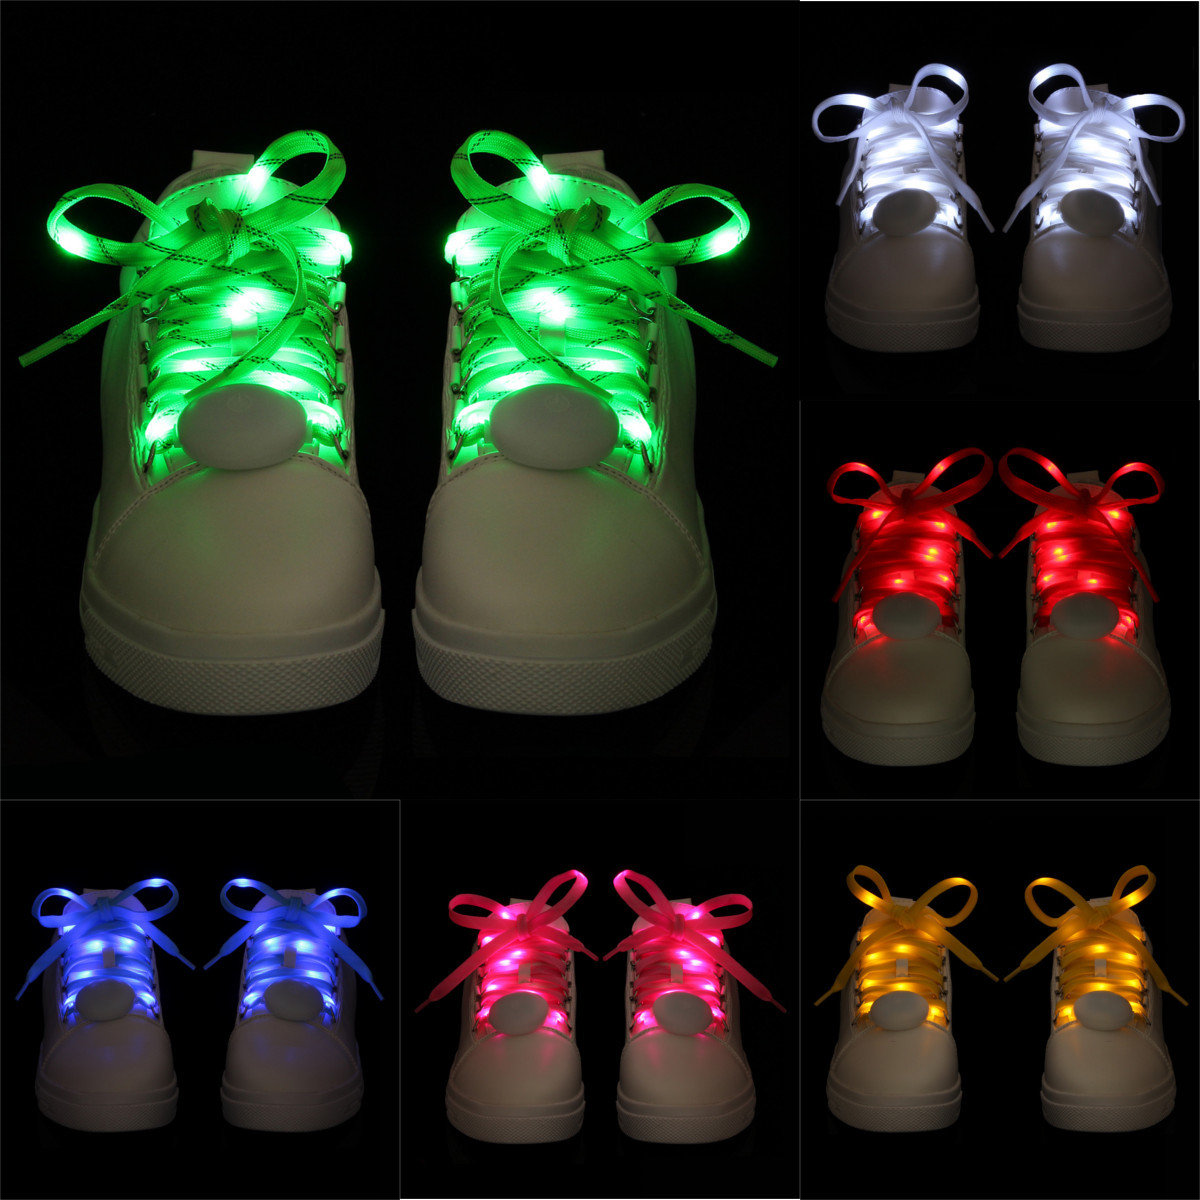 

8th Generation Flash Shoelaces LED Glowing Shoelaces, Red yellow blue green orange pink white